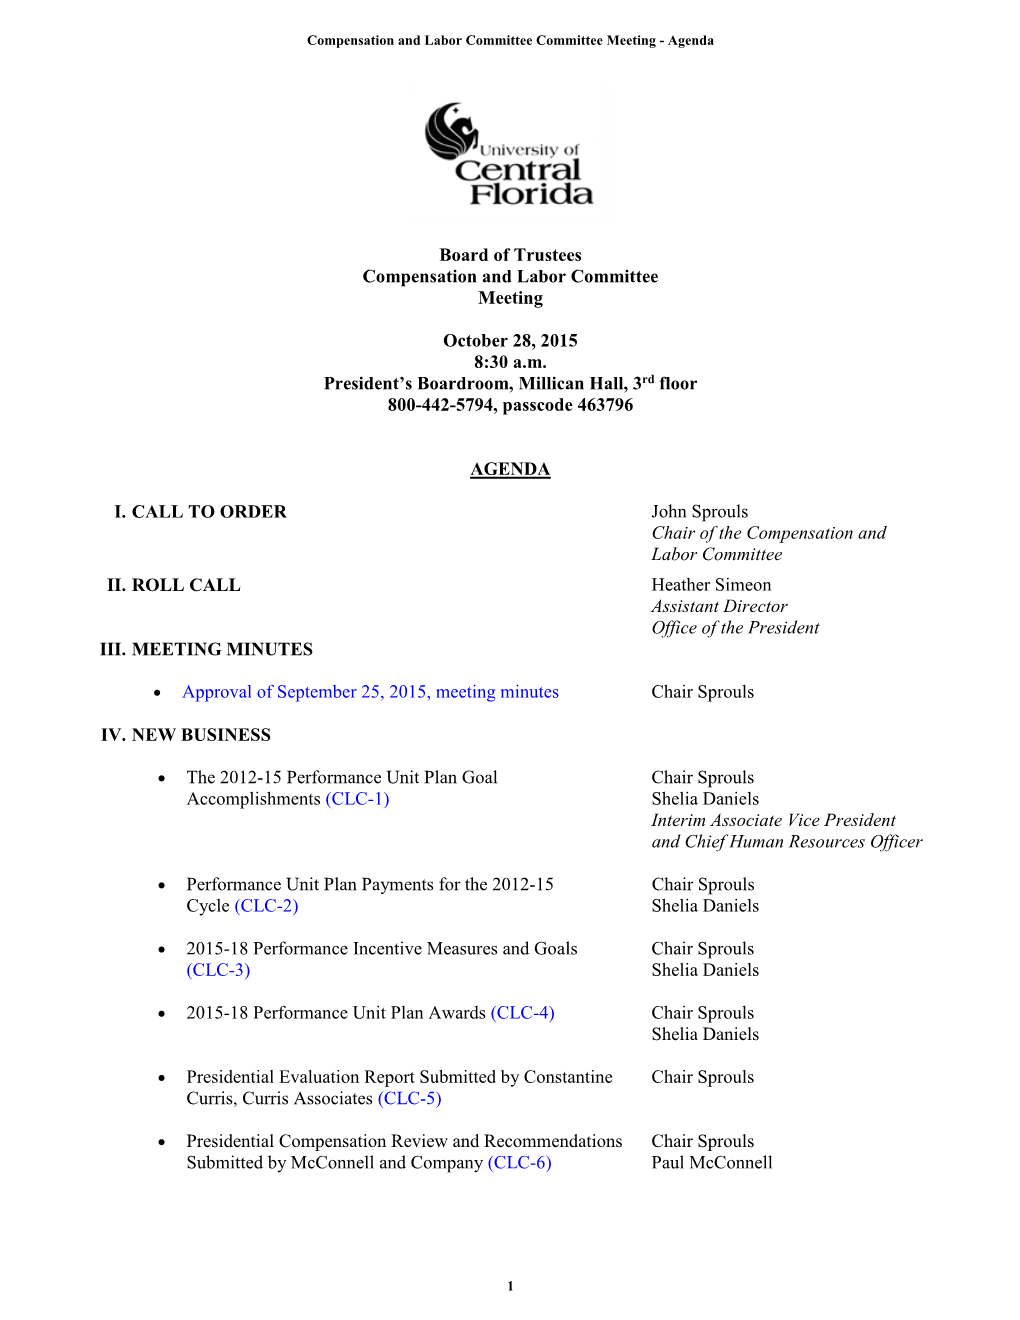 Board of Trustees Compensation and Labor Committee Meeting October 28, 2015 8:30 A.M. President's Boardroom, Millican Hall, 3R